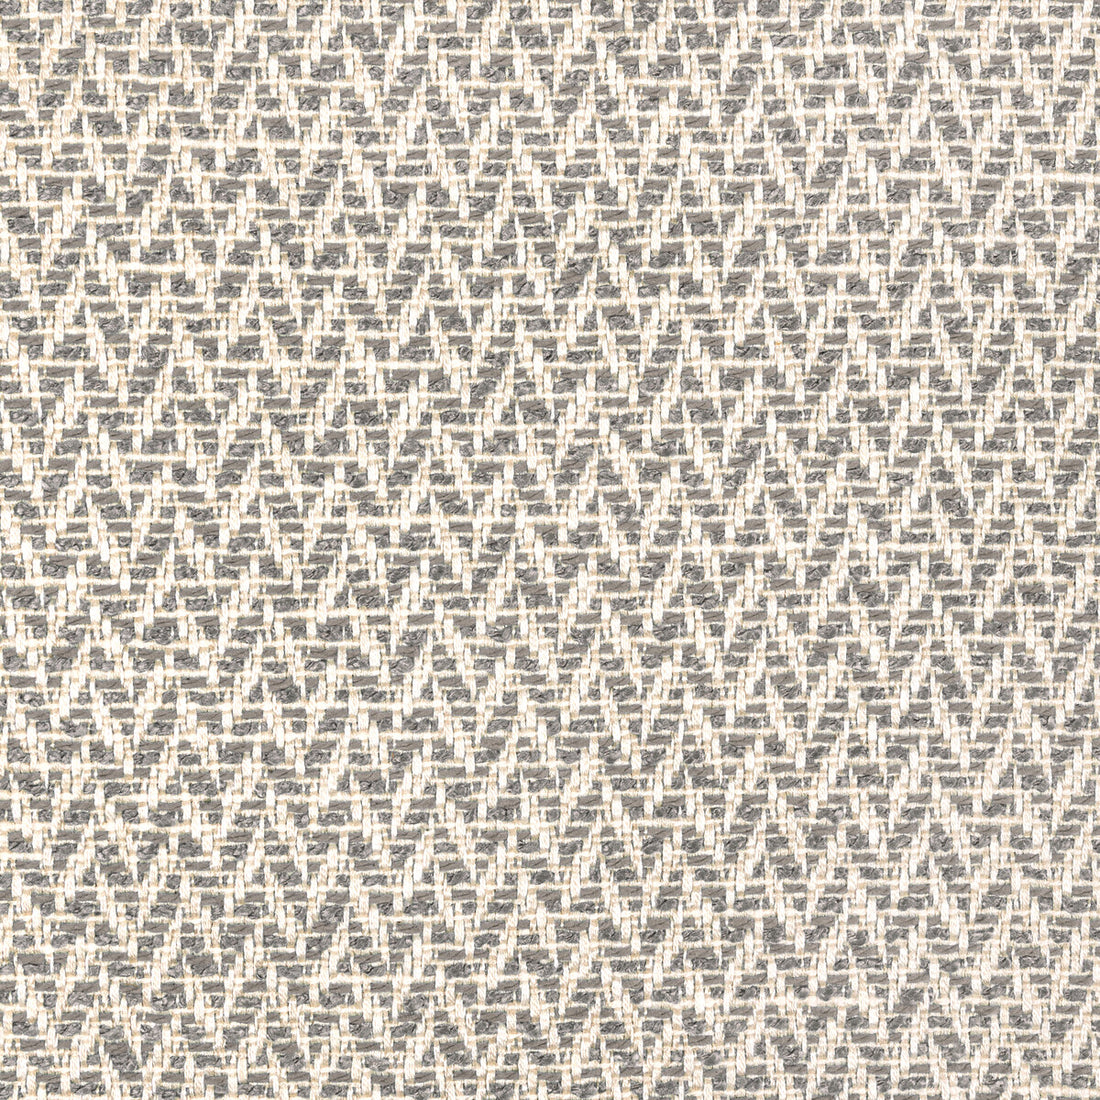 Kravet Design fabric in 36418-1101 color - pattern 36418.1101.0 - by Kravet Design in the Performance Crypton Home collection